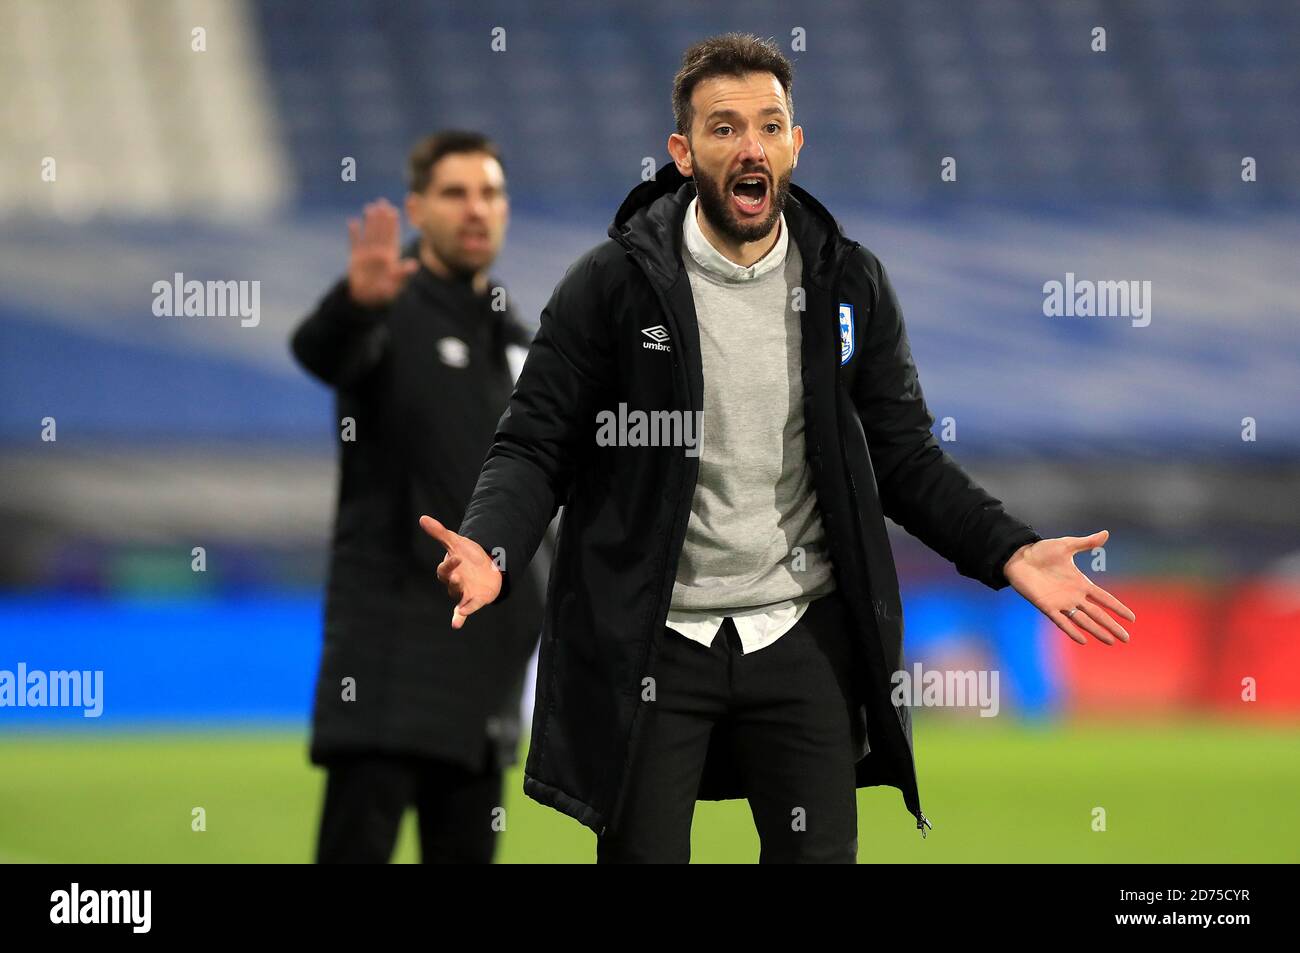 Huddersfield Town manager Carlos Corberan instructs his players during the Sky Bet Championship match at The John Smith's Stadium, Huddersfield. Stock Photo